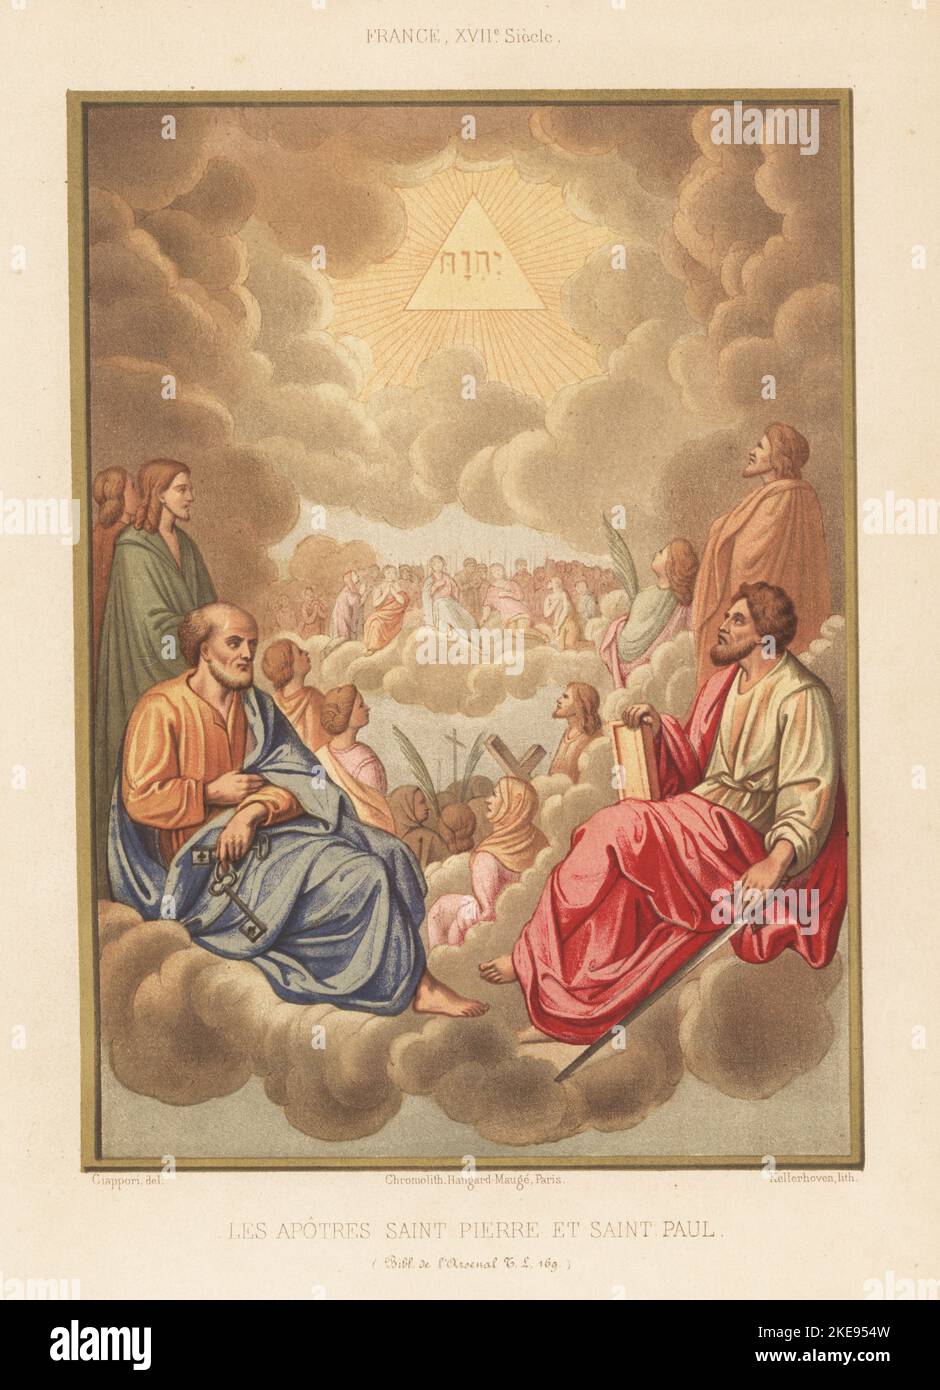 The apostles Saint Peter and Saint Paul seated on a cloud. Peter at left with keys, Paul at right with Bible and sword. Les apotres Saint Pierre et Saint Paul. From an illuminated manuscript Collectarium ad usum regalis ecclesiae sanctae Catherinae in cultura Parisiensis, 1687, TL MS 169, Bibliotheque de l'Arsenal. Chromolithograph by Franz Kellerhoven after an illustration by Claudius Joseph Ciappori from Charles Louandre’s Les Arts Somptuaires, The Sumptuary Arts, Hangard-Mauge, Paris, 1858. Stock Photo